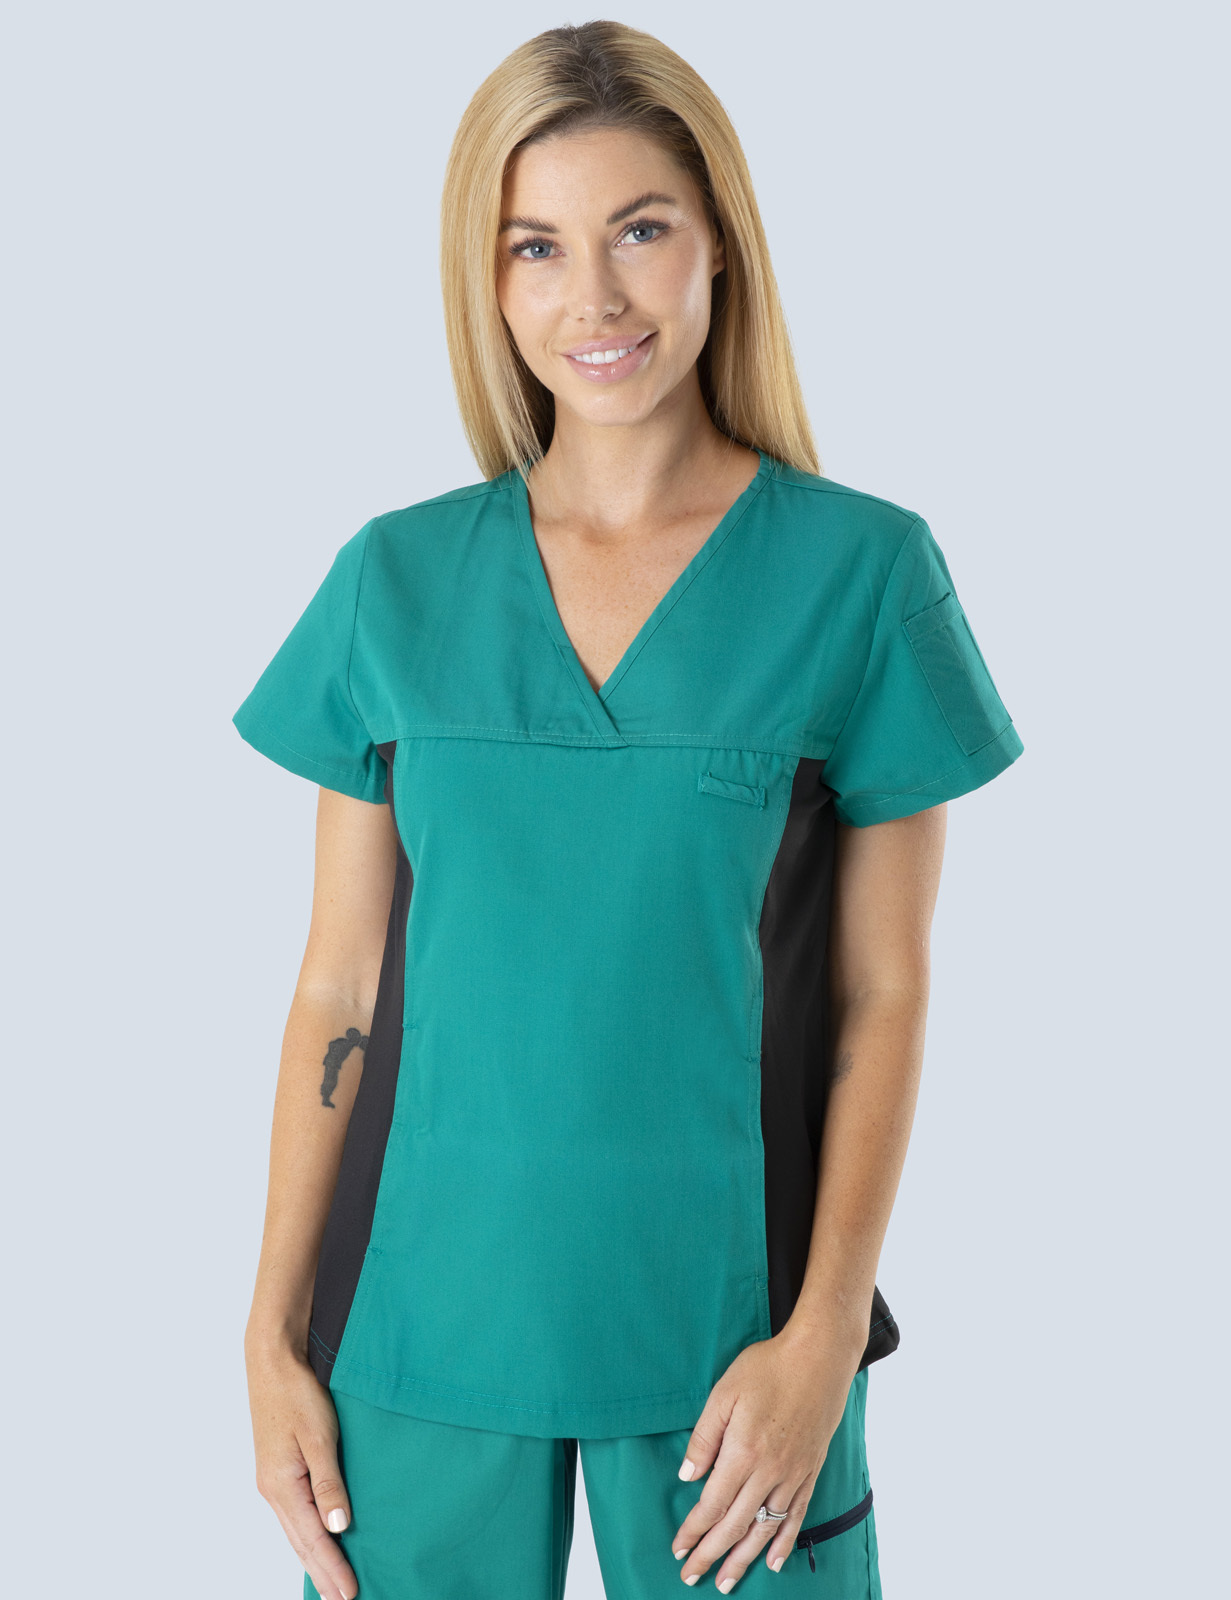 Pathology North (Women's Fit Spandex Scrub Top in Hunter and Cargo Pants in Black incl Logos)